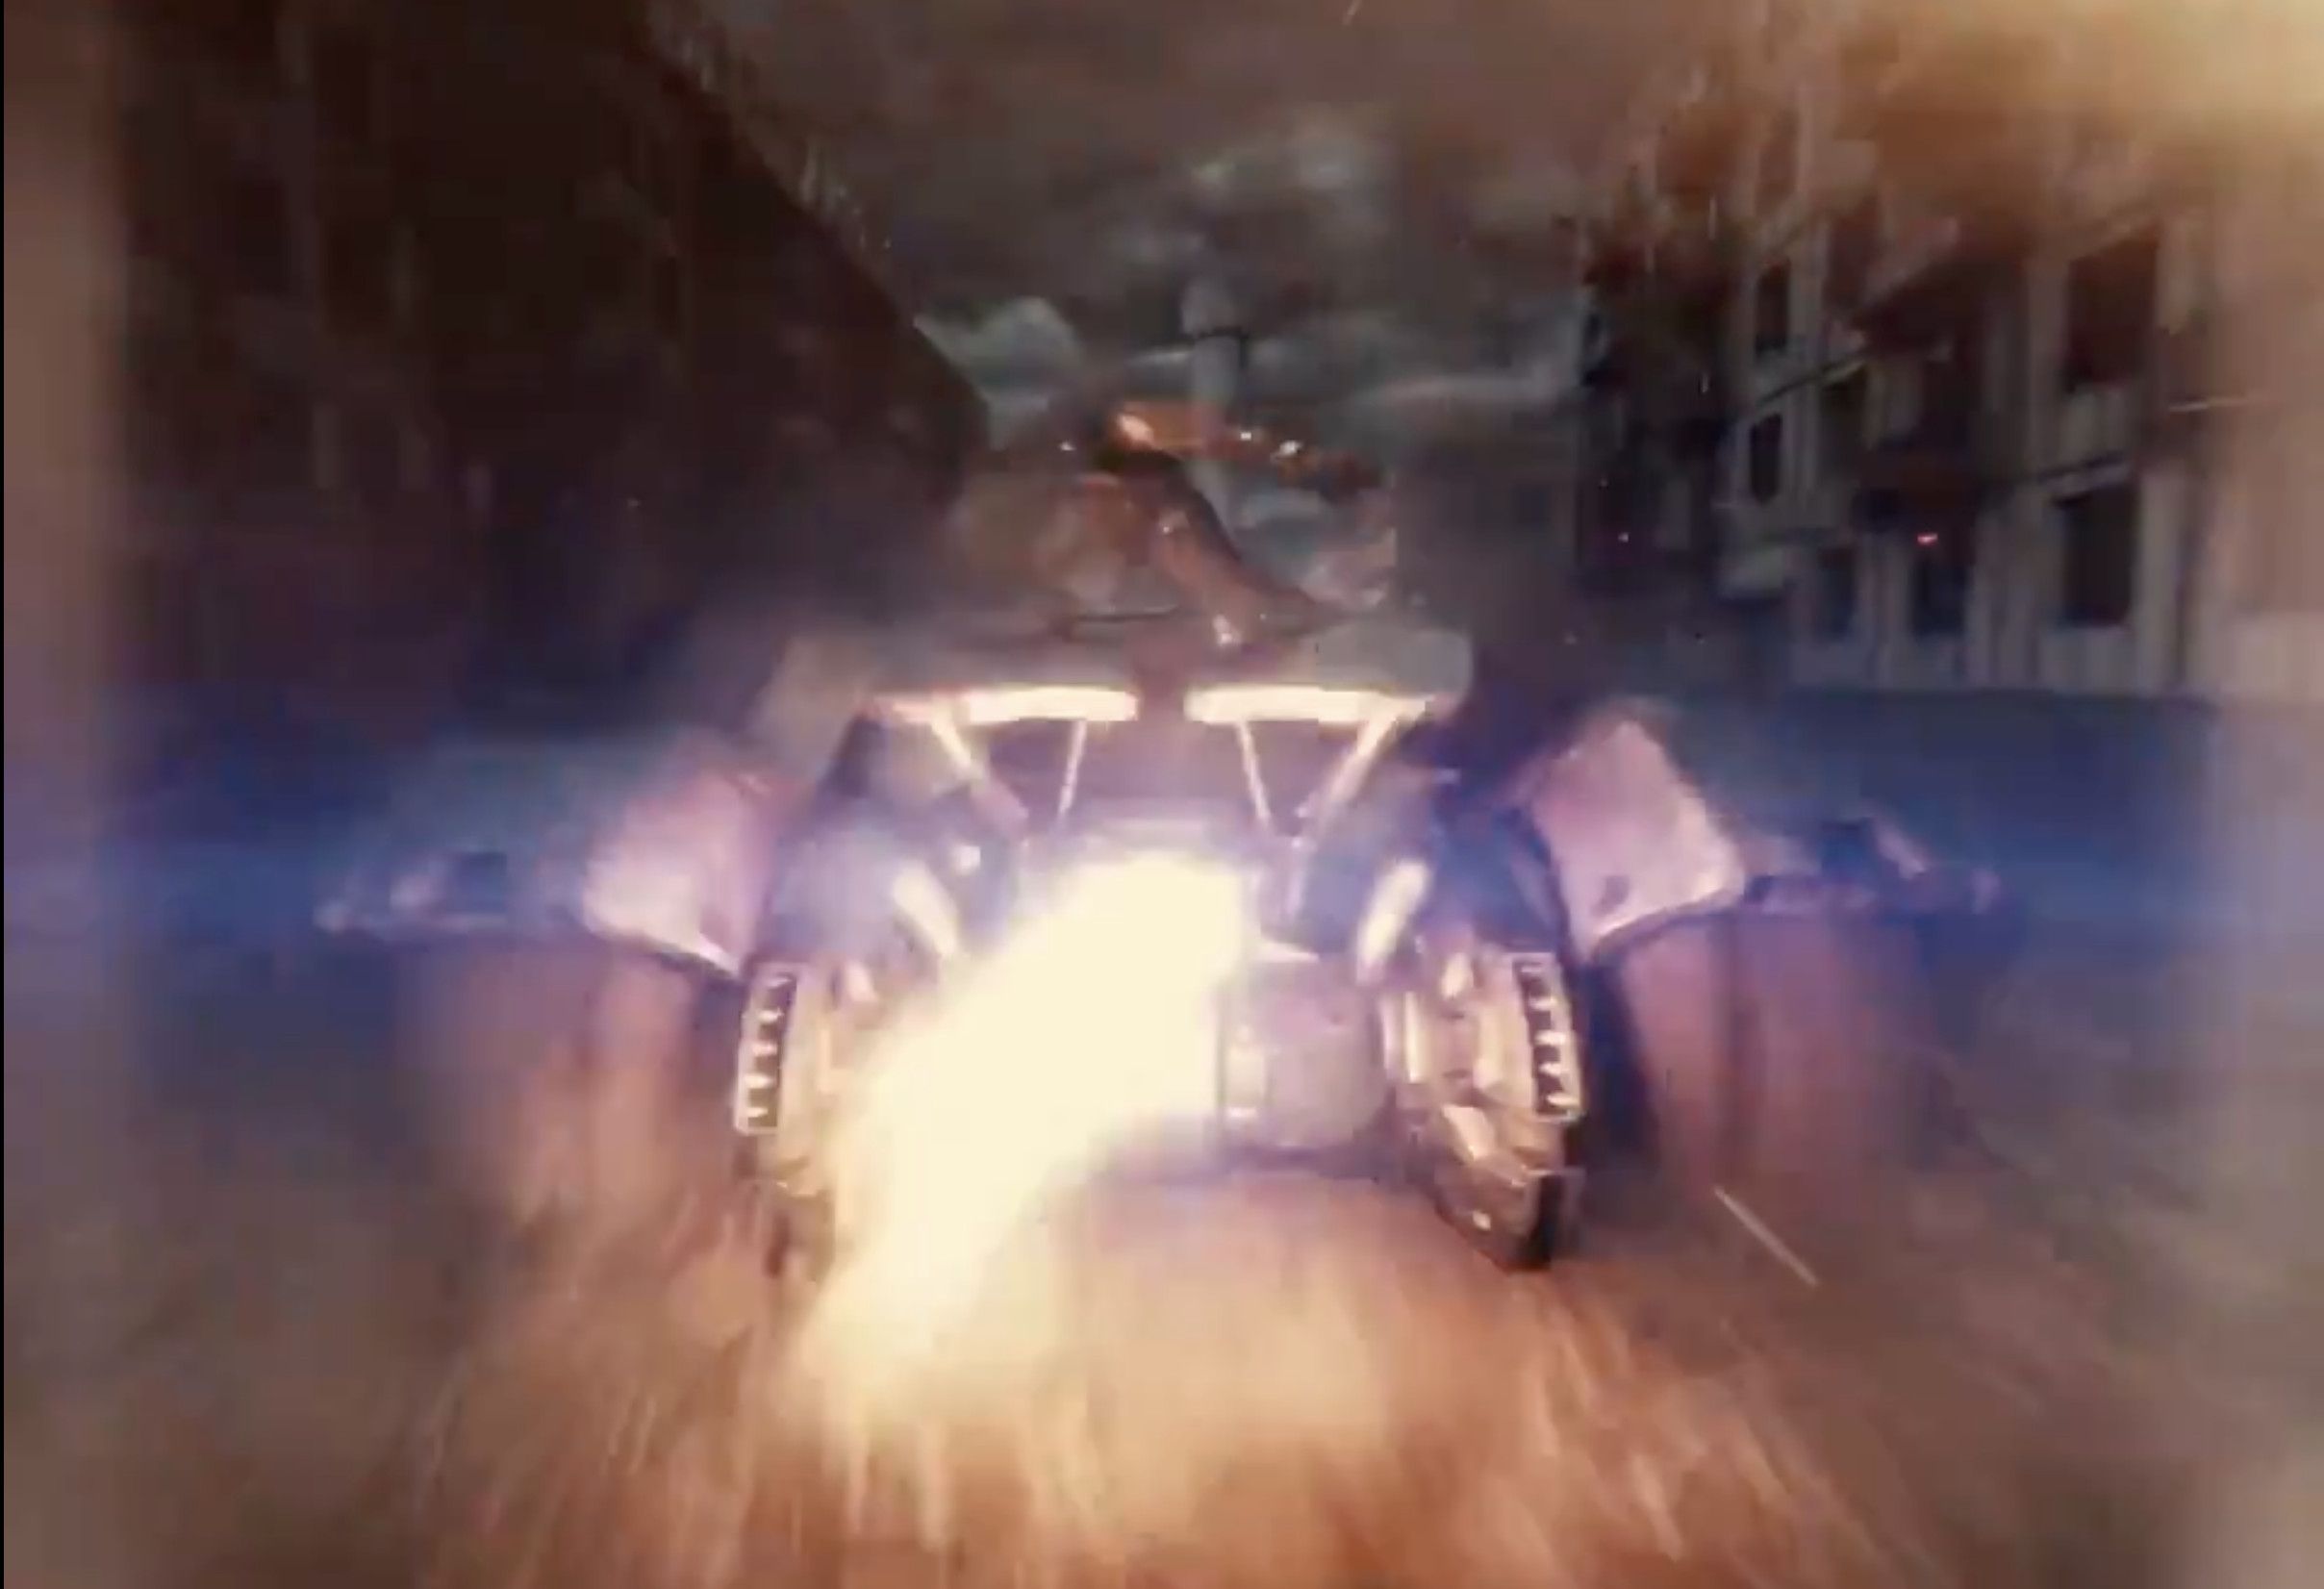 The Batmobile in action during the final battle